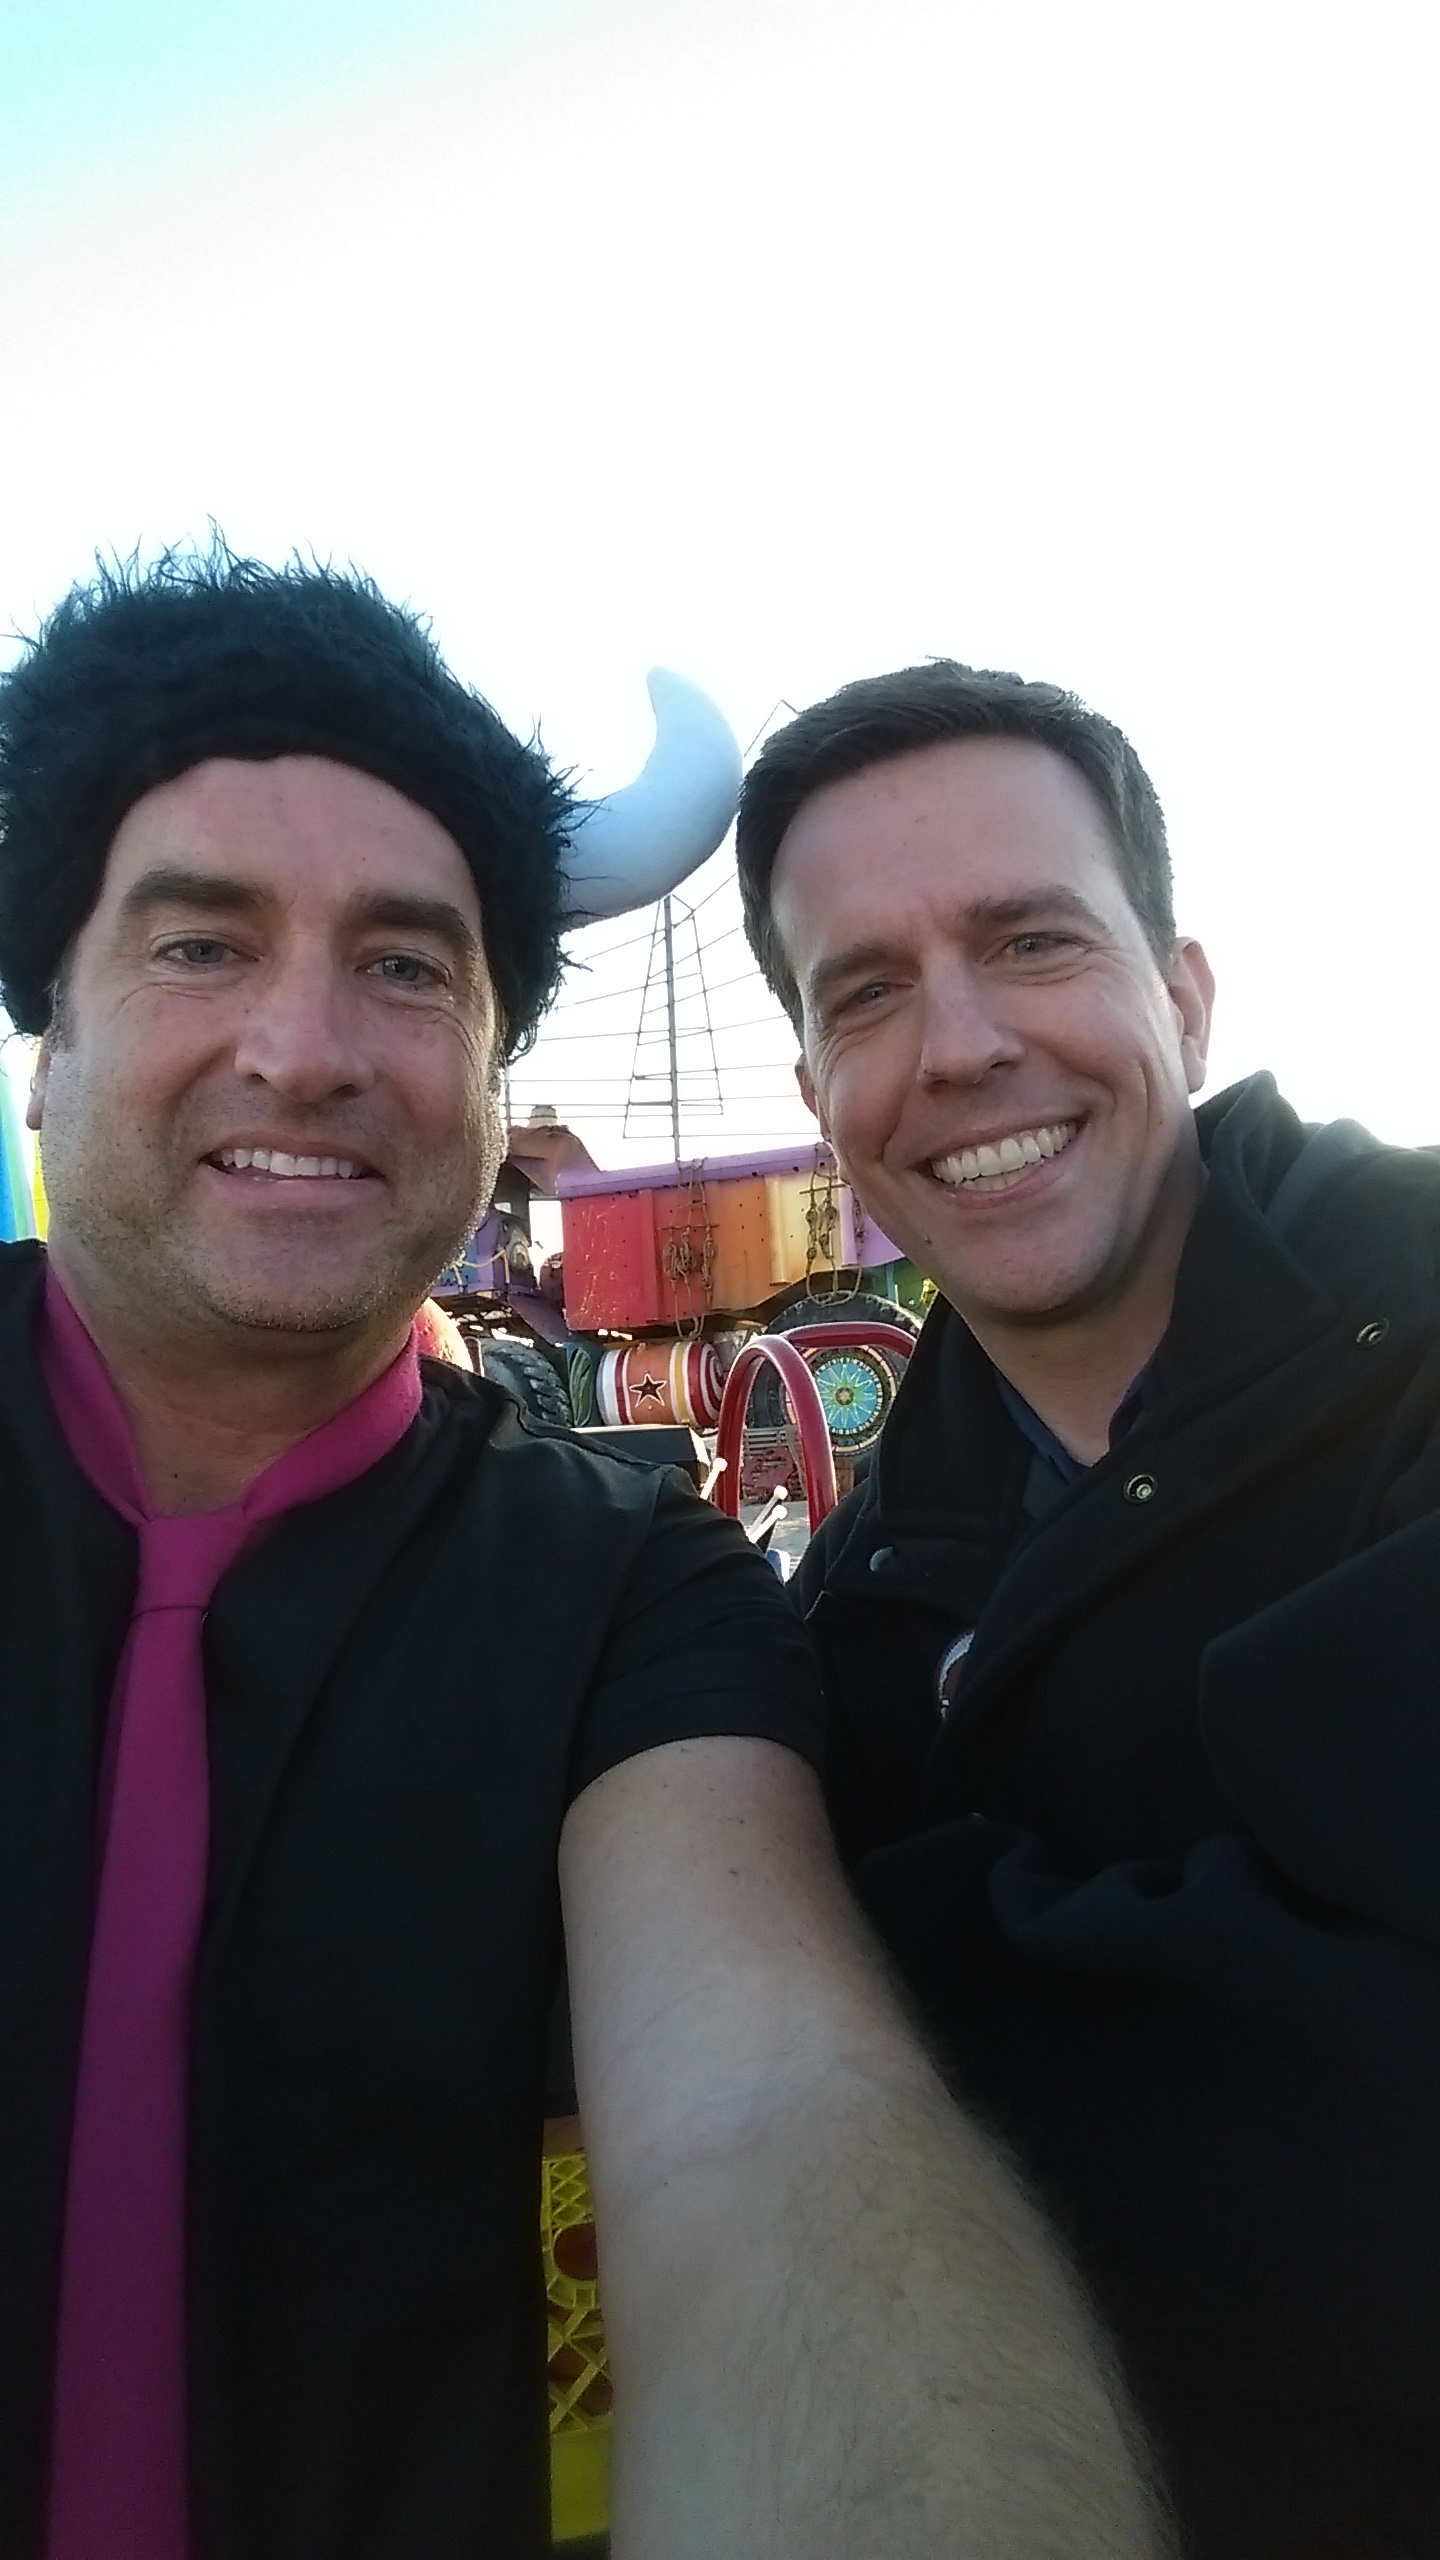 Kevin J. O'Connor with Ed Helms on set while filming the upcoming 